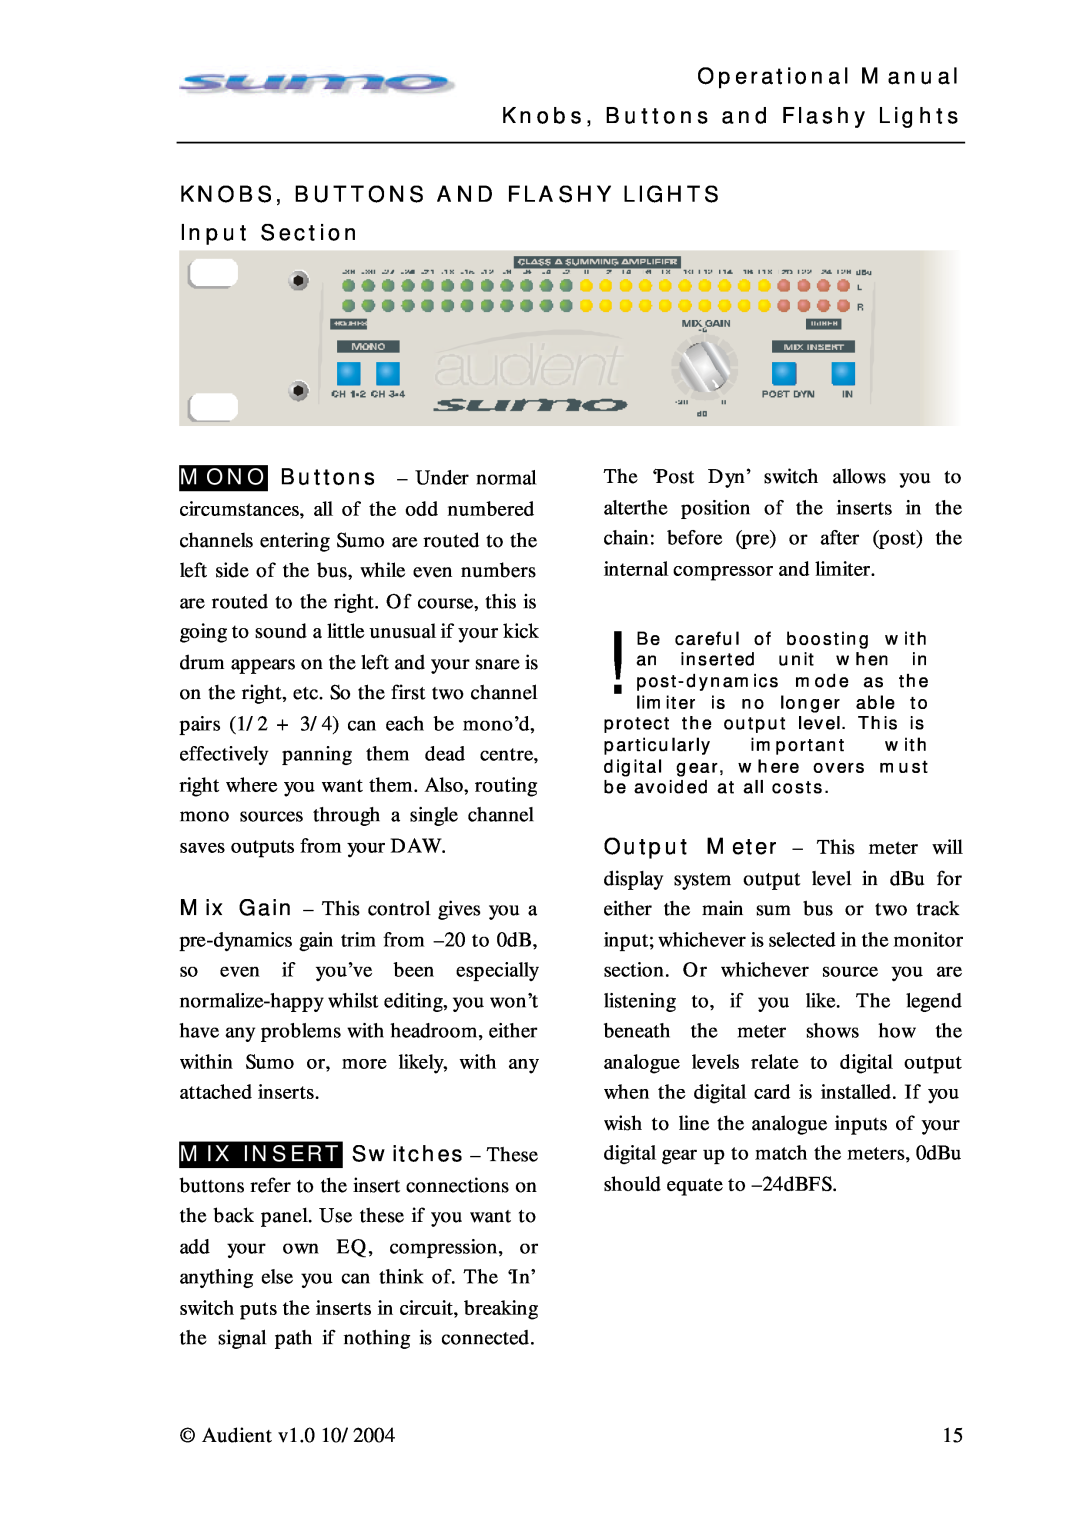 Sumo Summing Amplifier manual Knobs, Buttons and Flashy Lights, KNOBS, BUTTONS AND FLASHY LIGHTS Input Section 